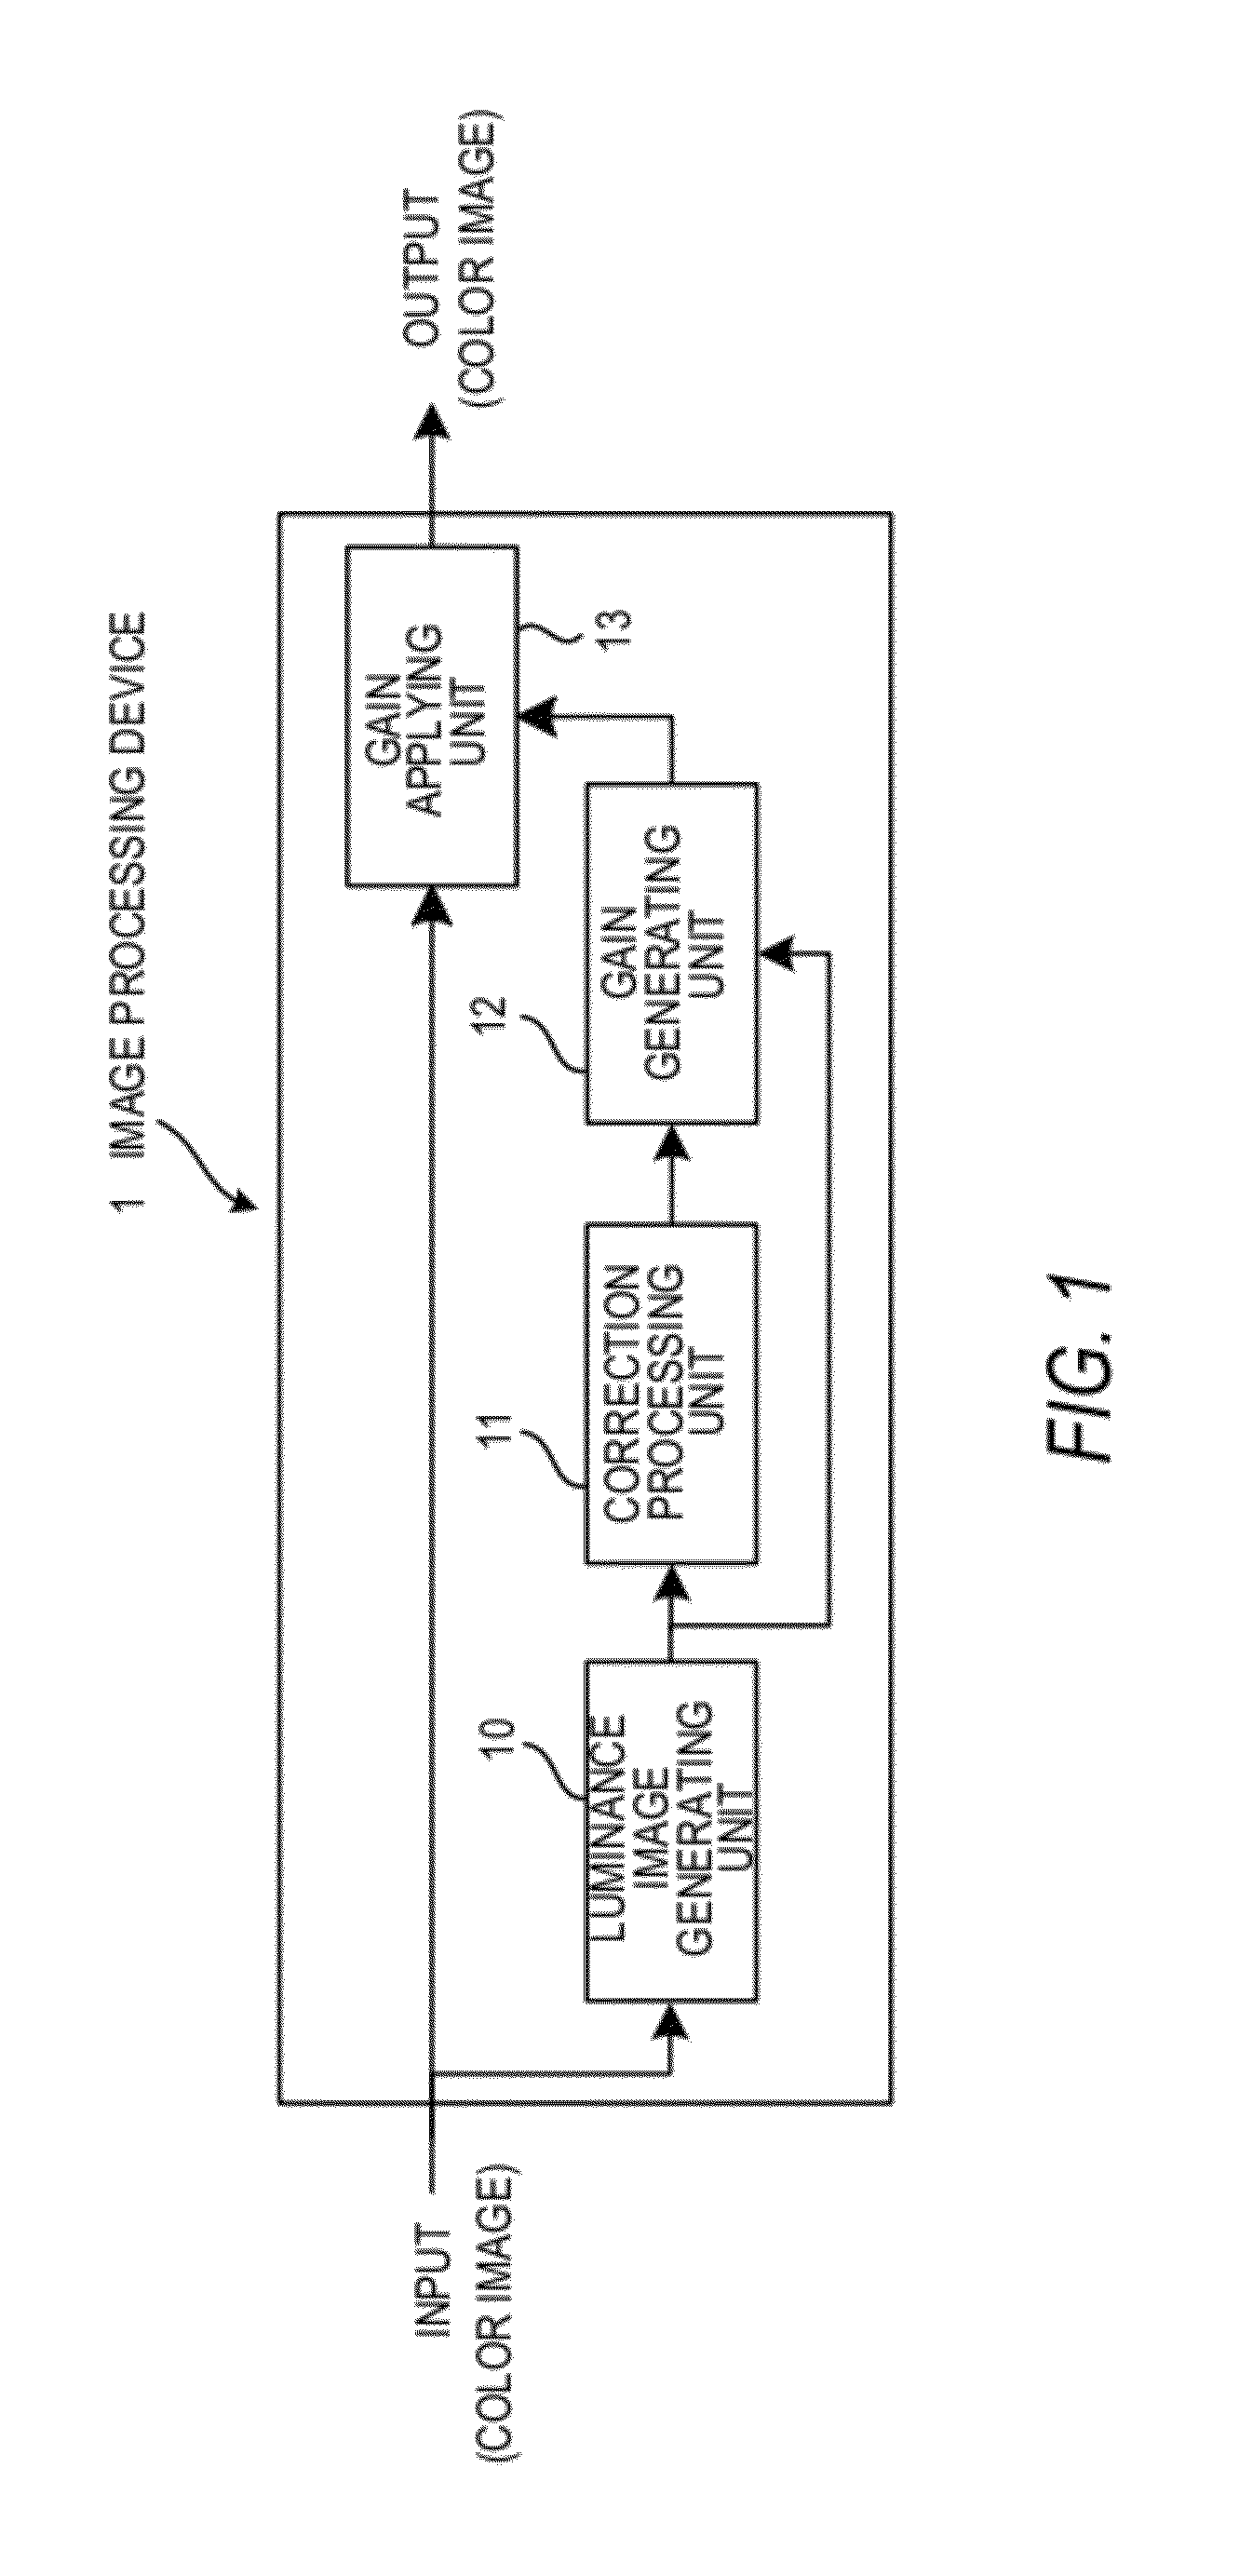 Image processing device, image processing method and storage medium storing image processing program